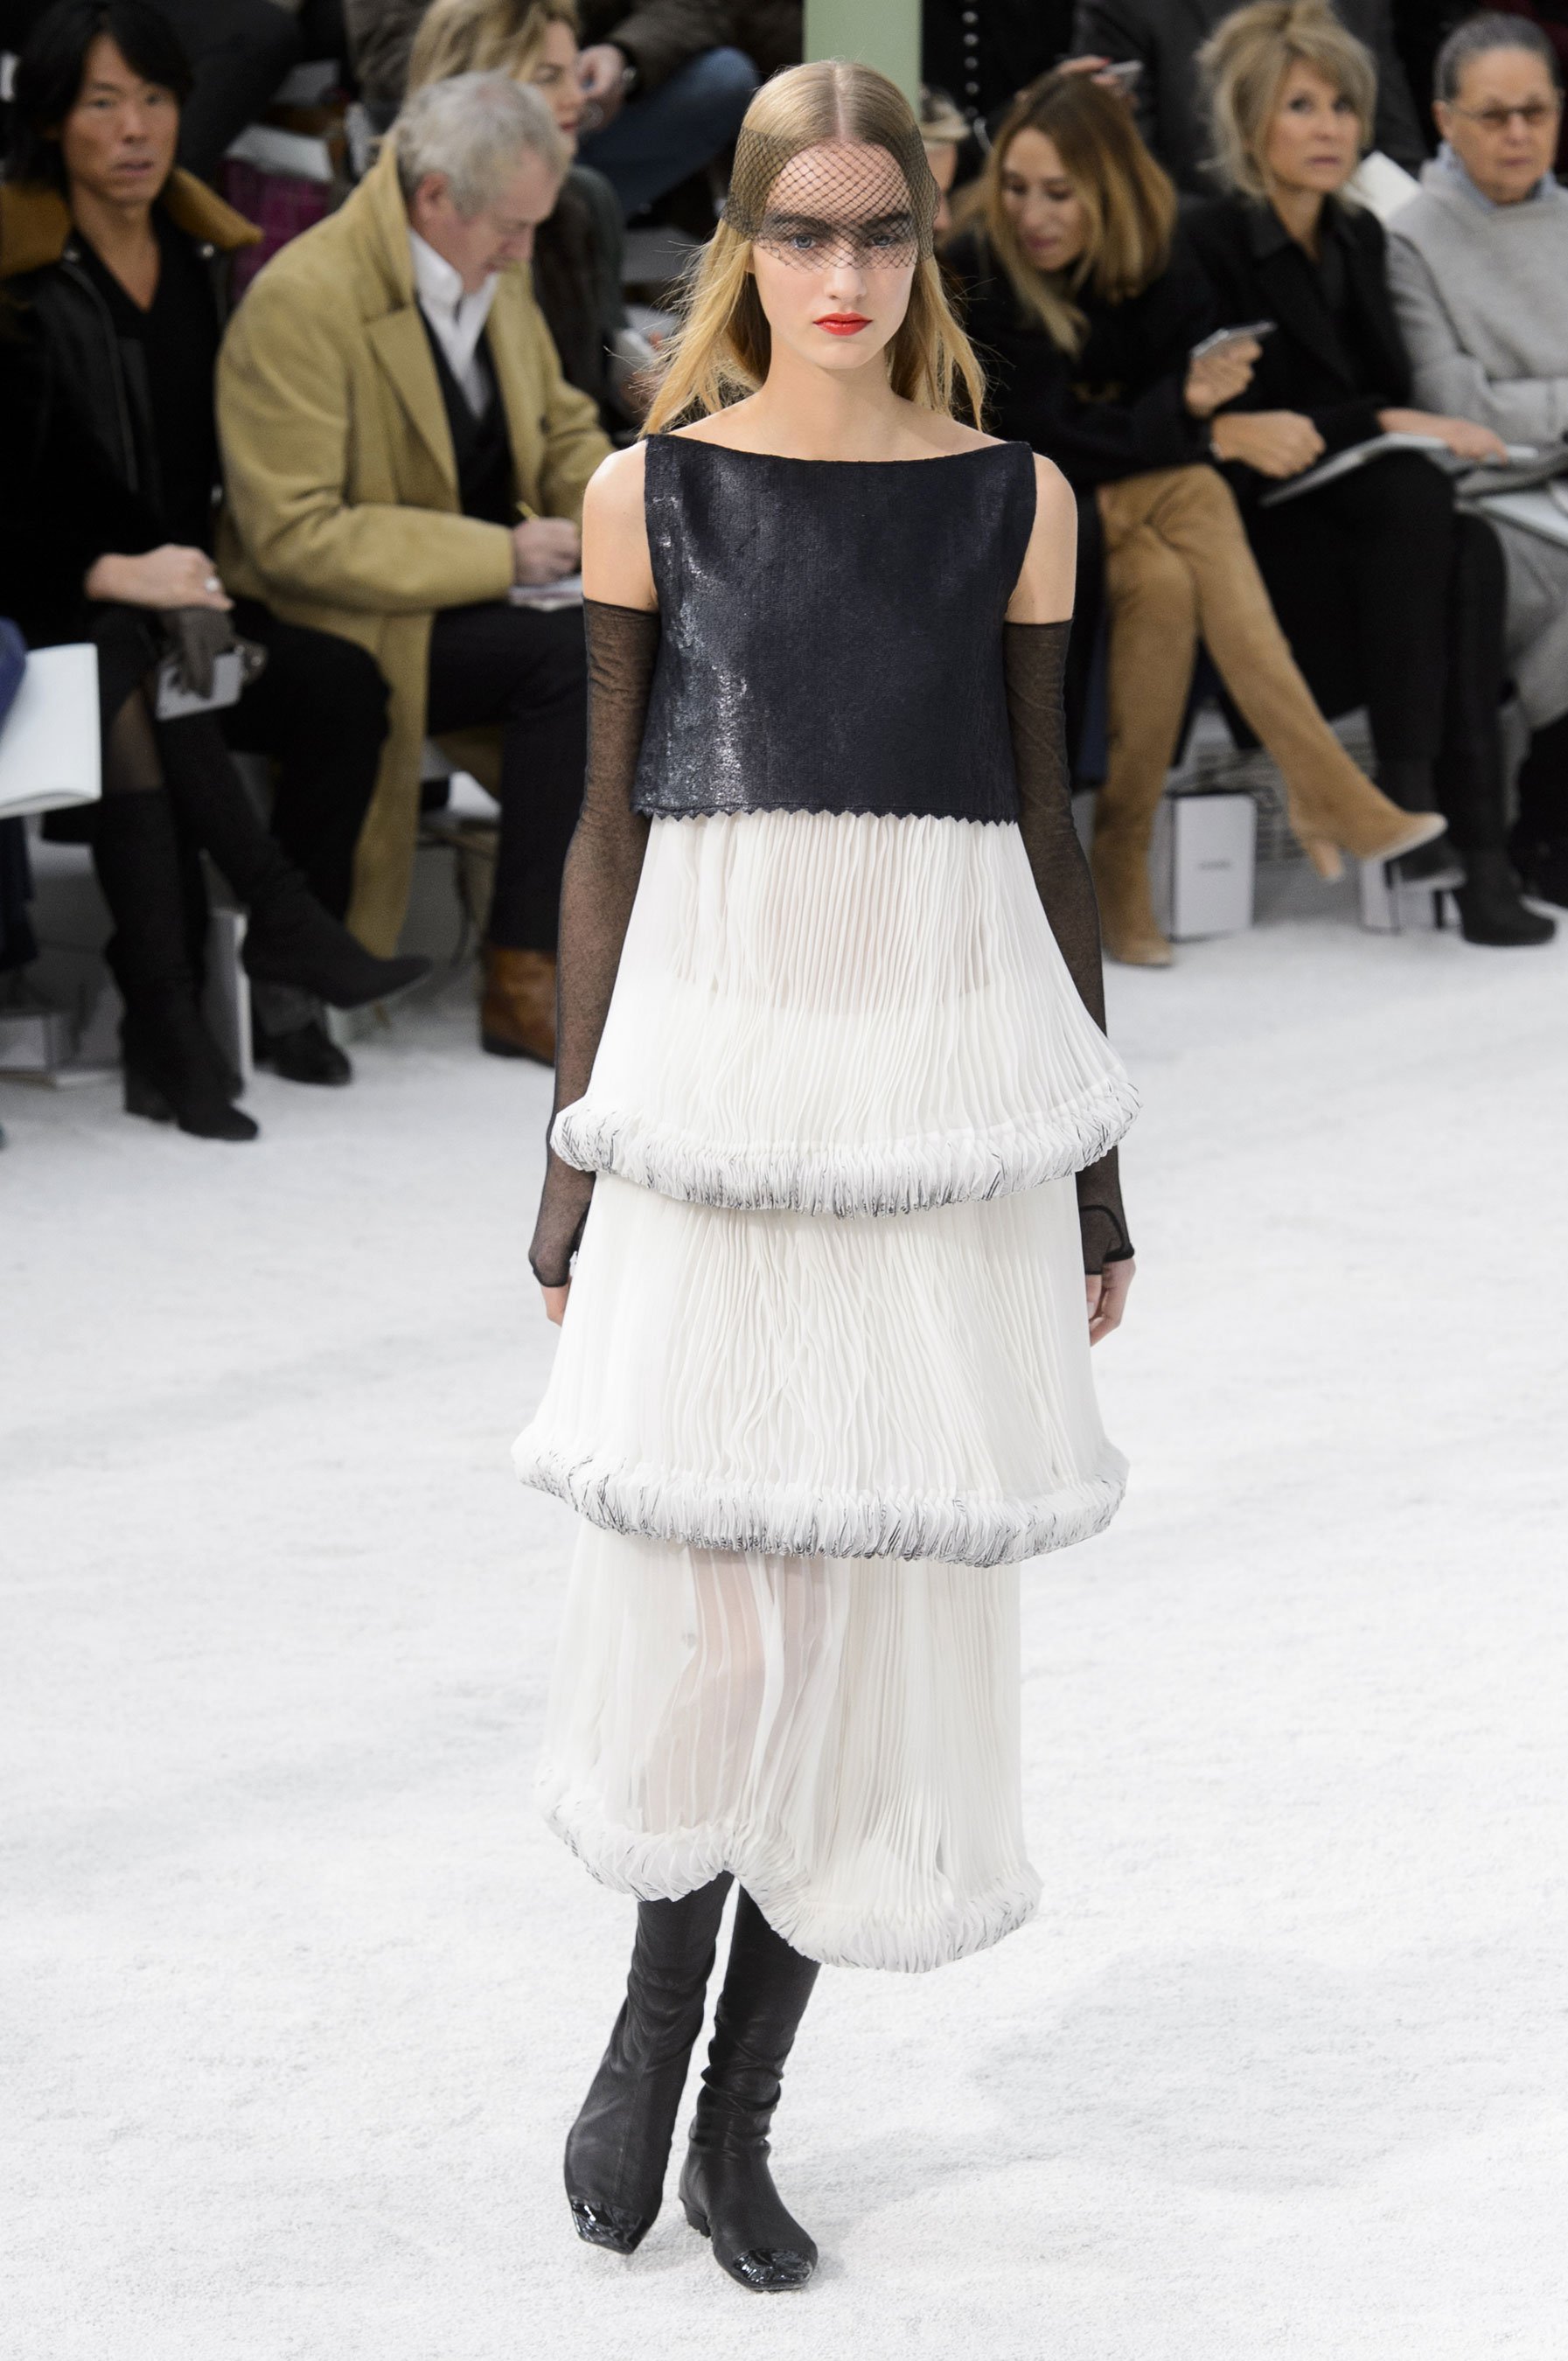 chanel haute couture spring 2015 pfw 57 maartje